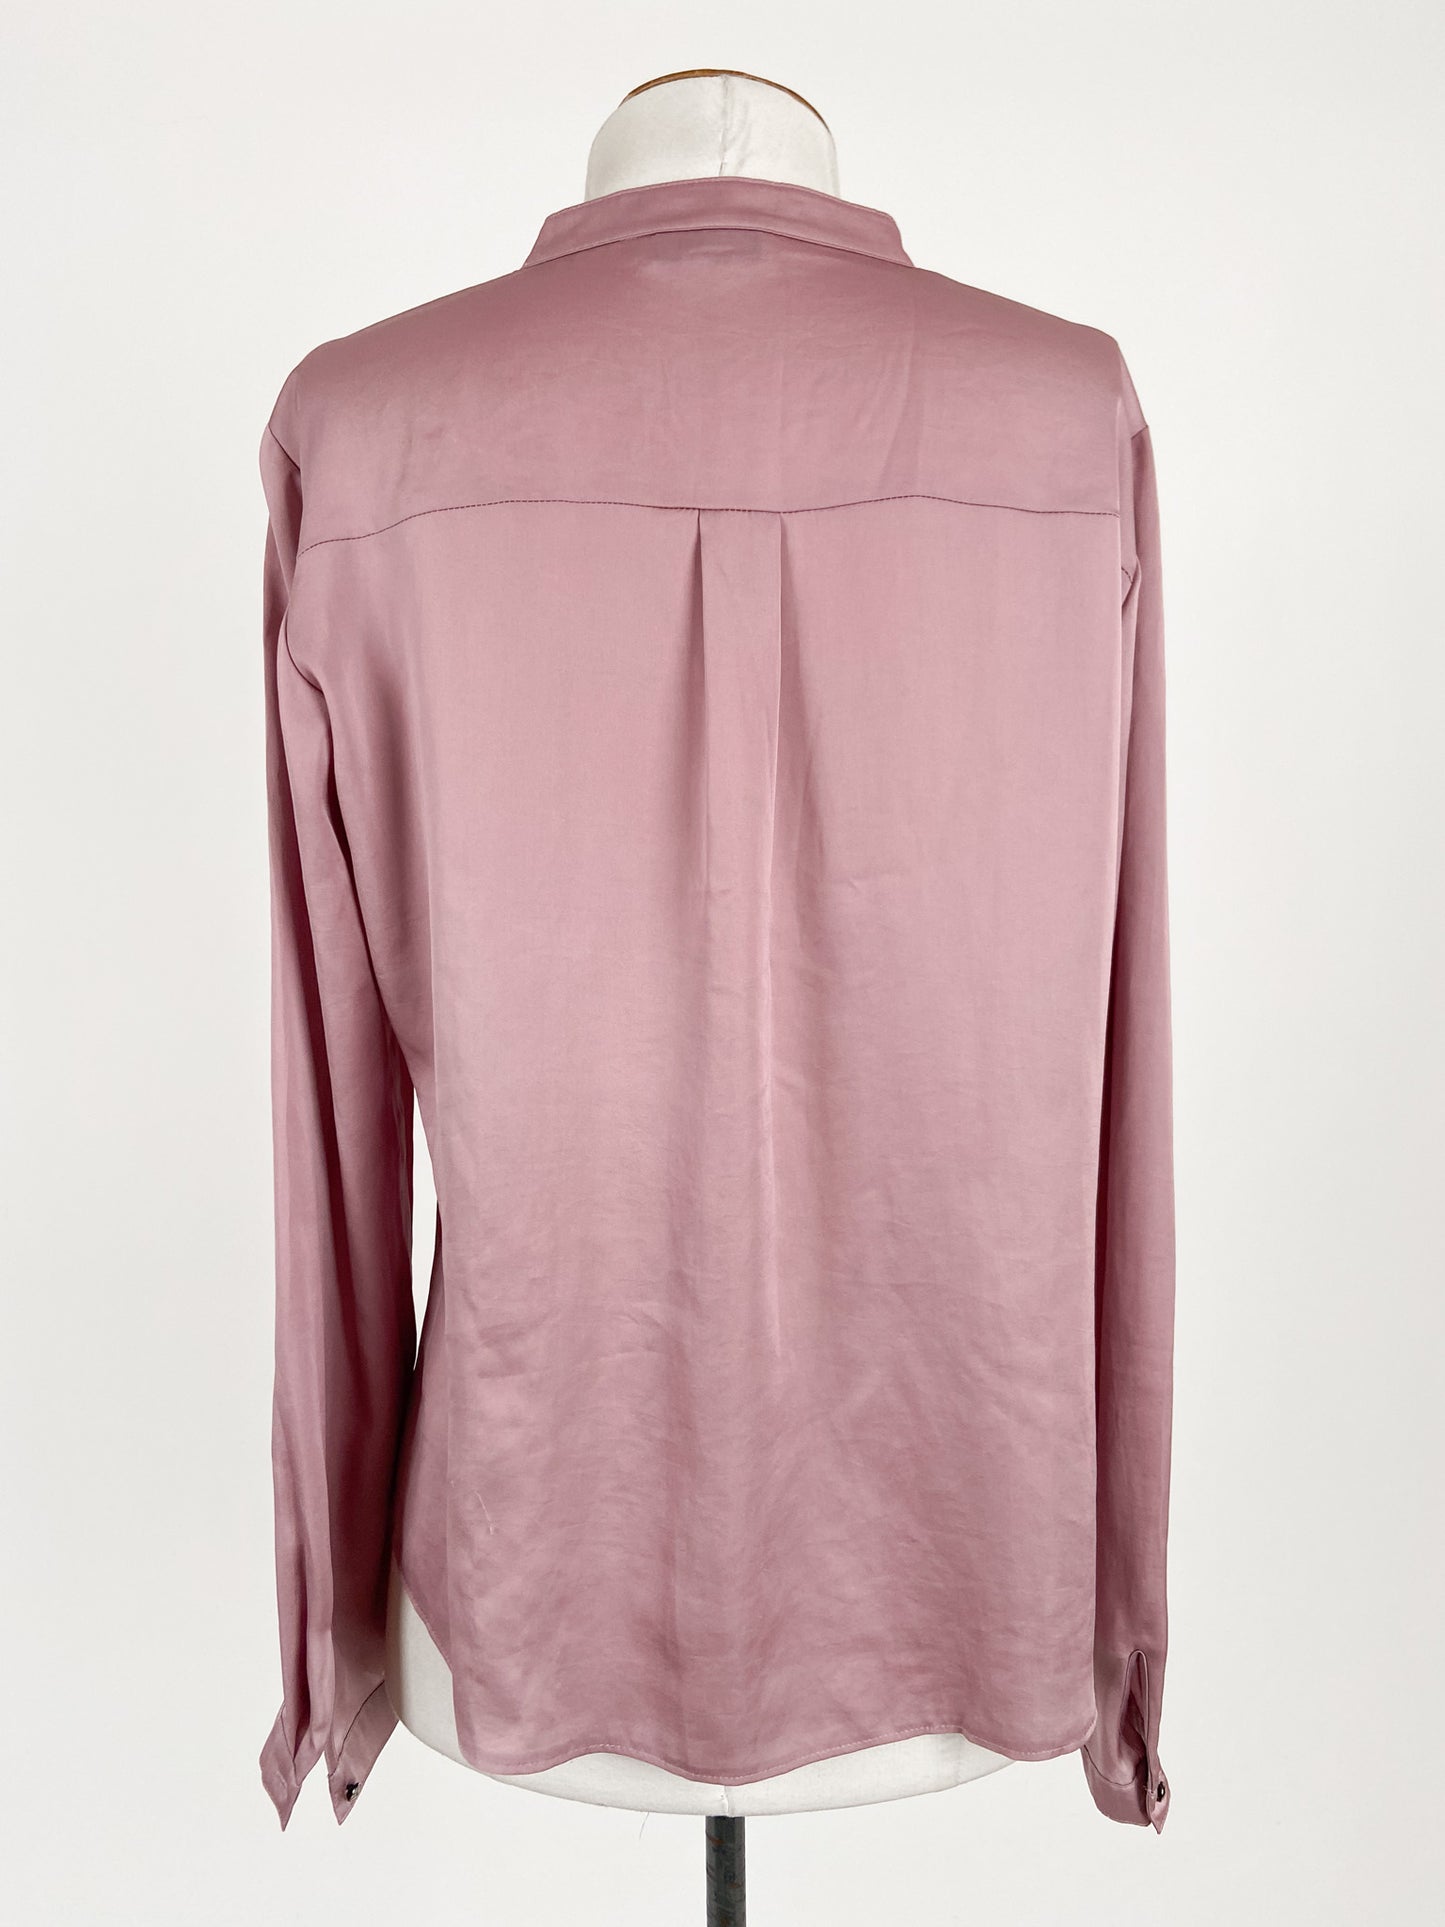 Gerry Weber | Pink Workwear Top | Size M